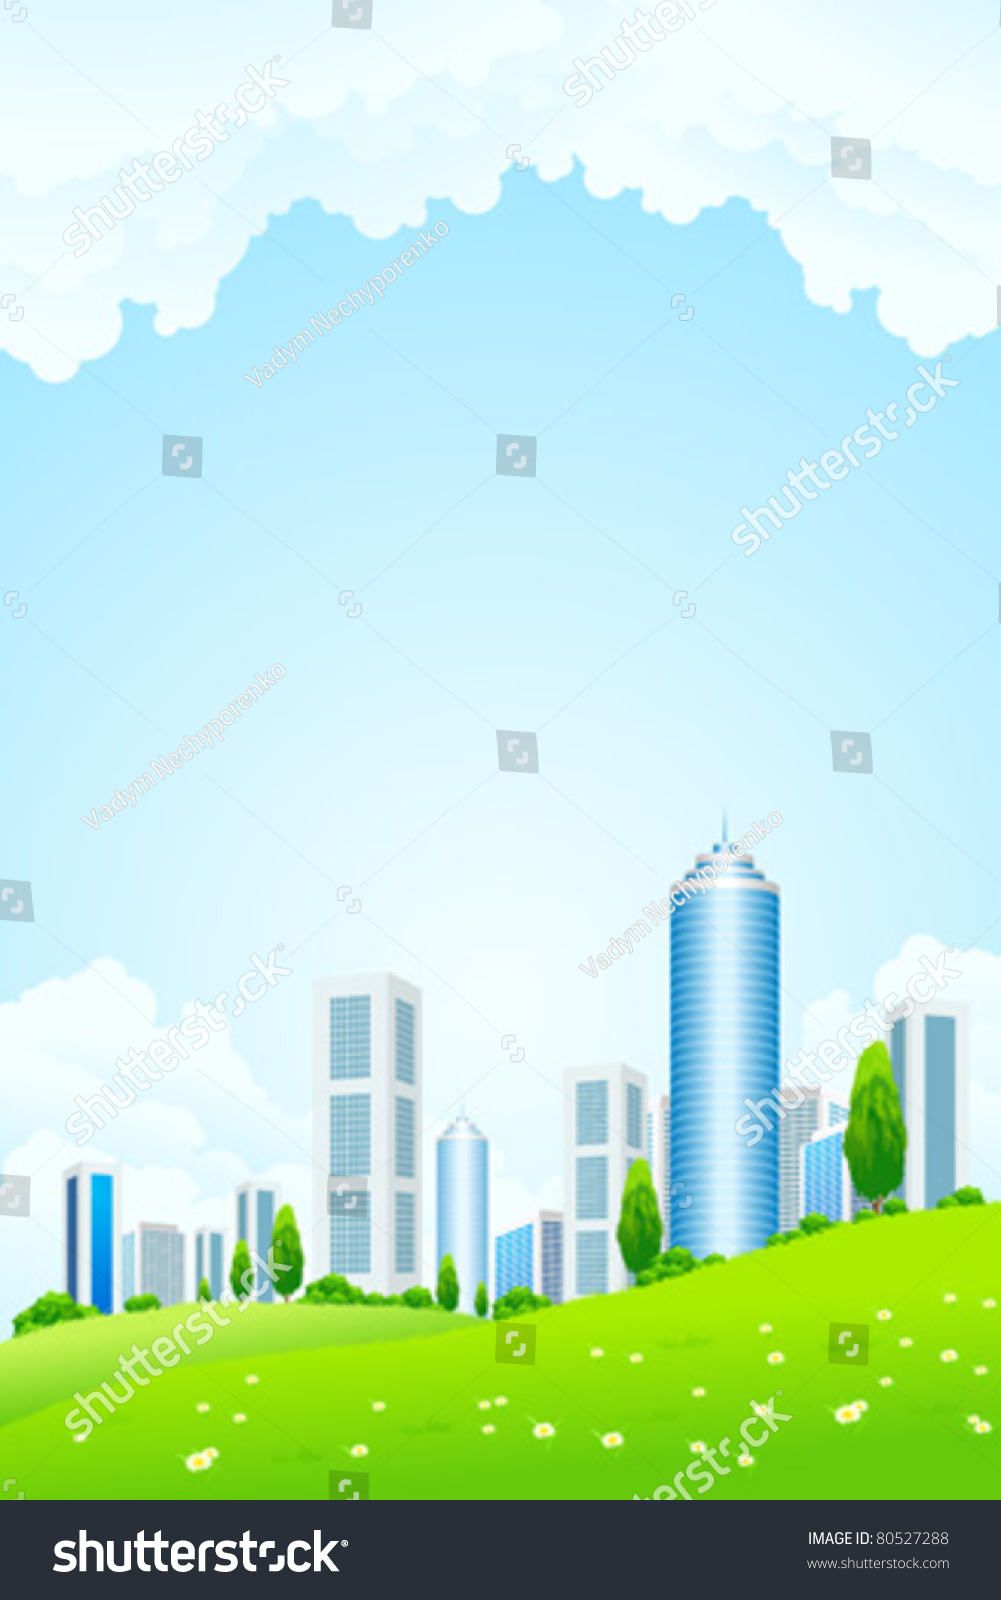 Green Landscape With Tree City And Clouds Stock Vector Illustration